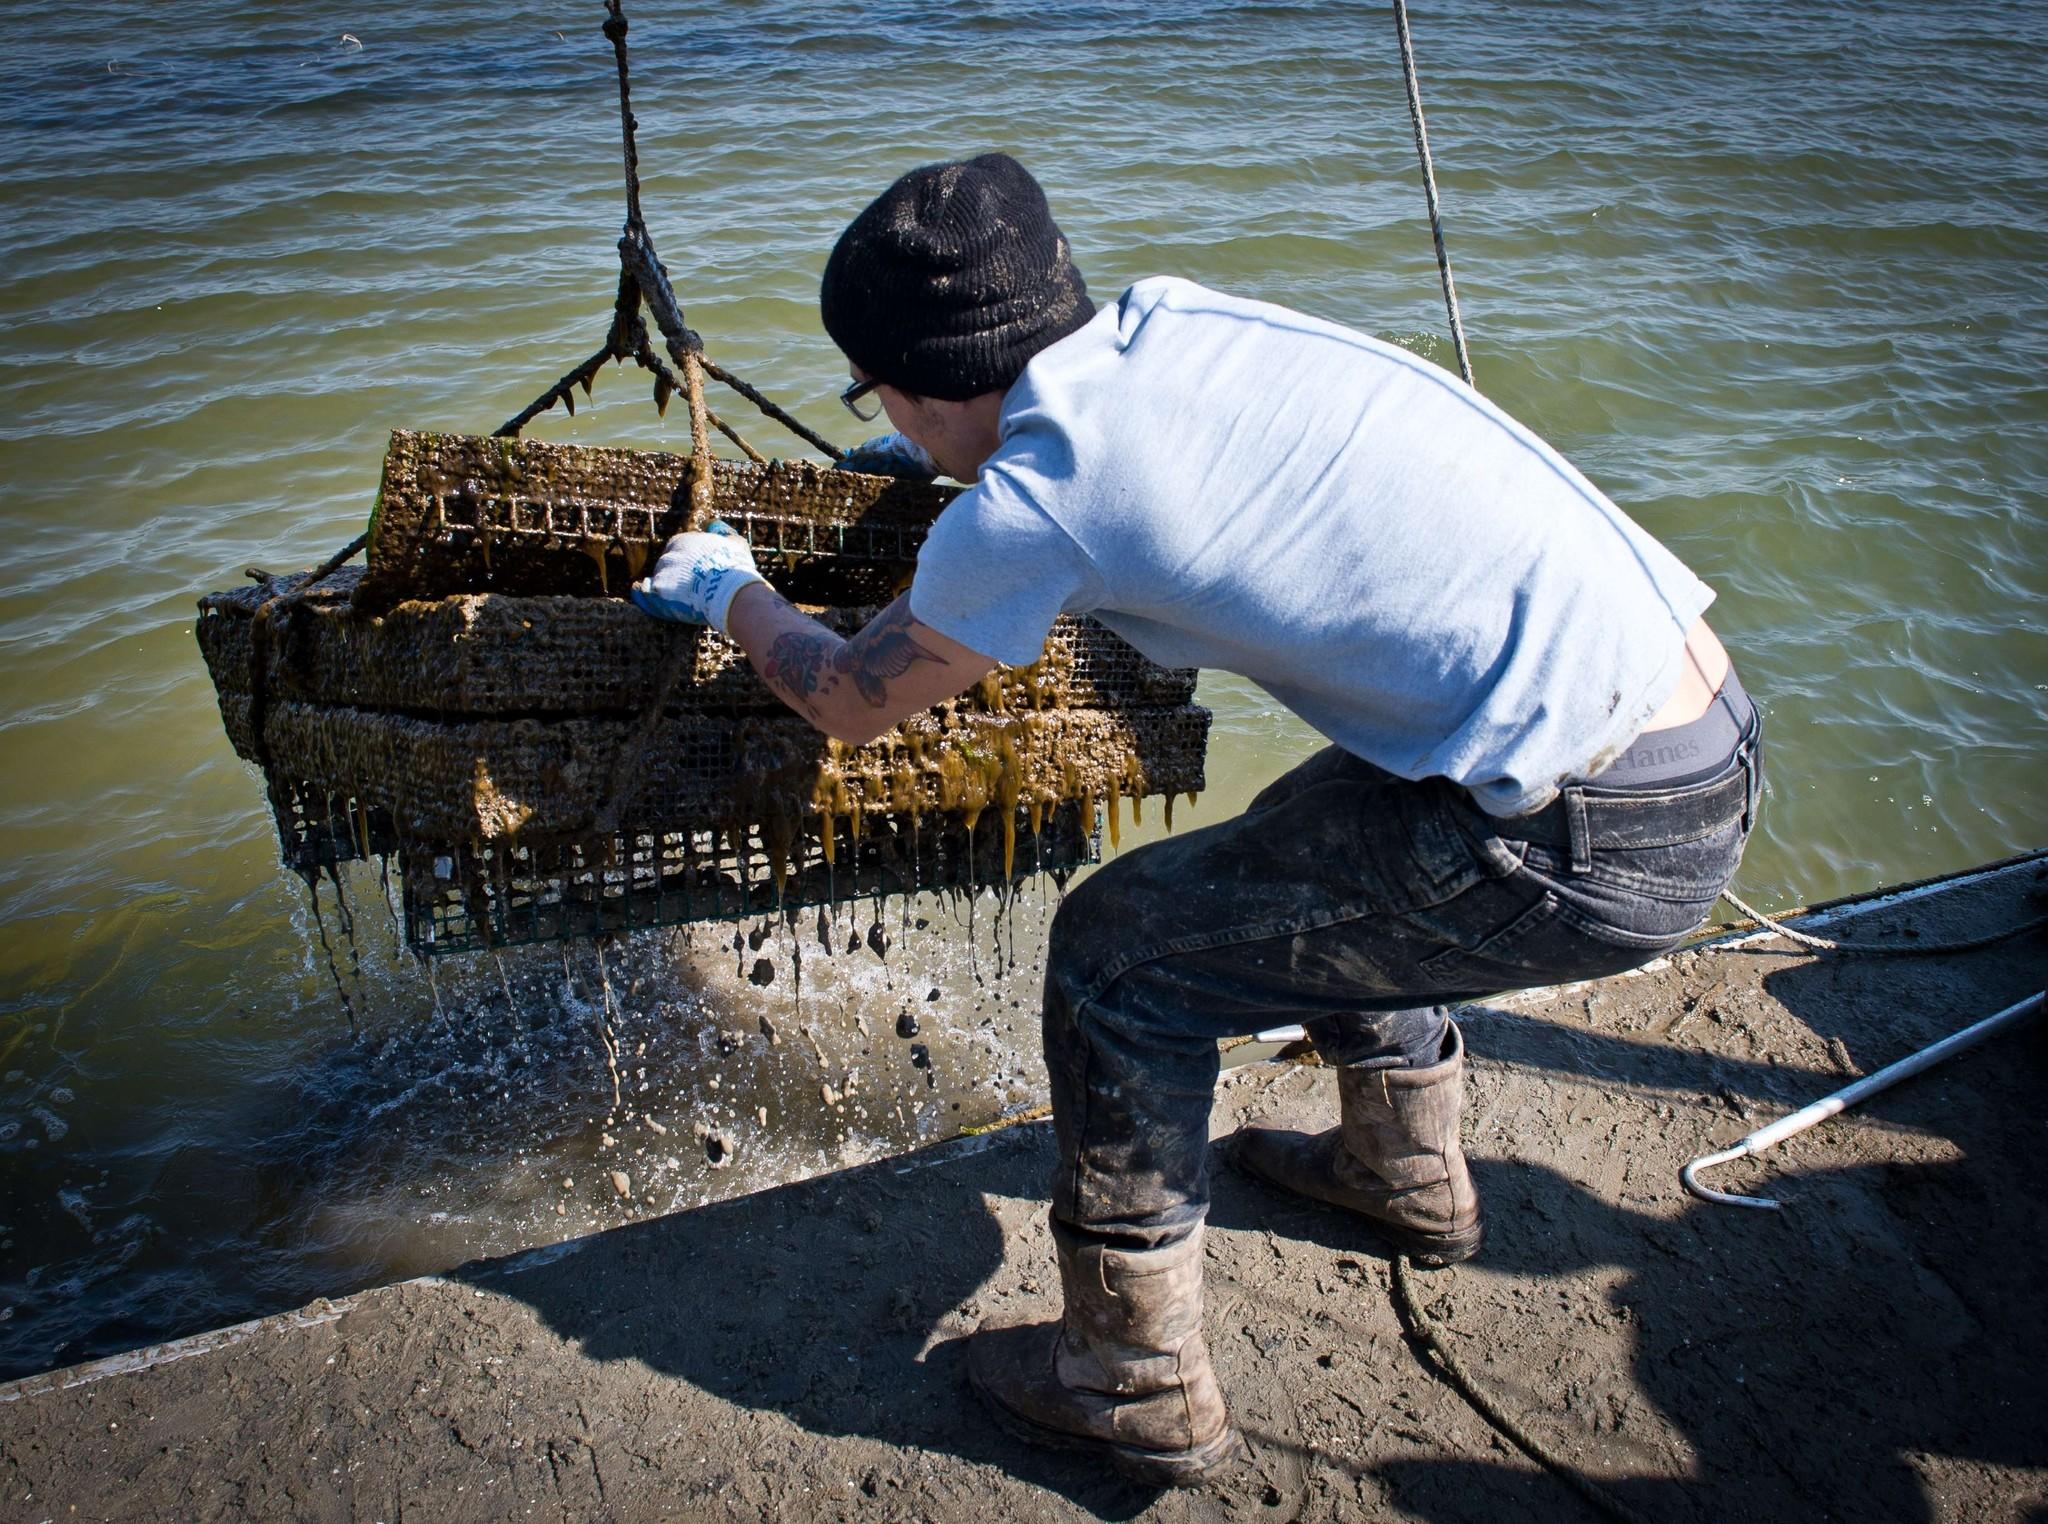 An employee of the Hollywood Oyster company in Maryland pulls oysters out of the water.